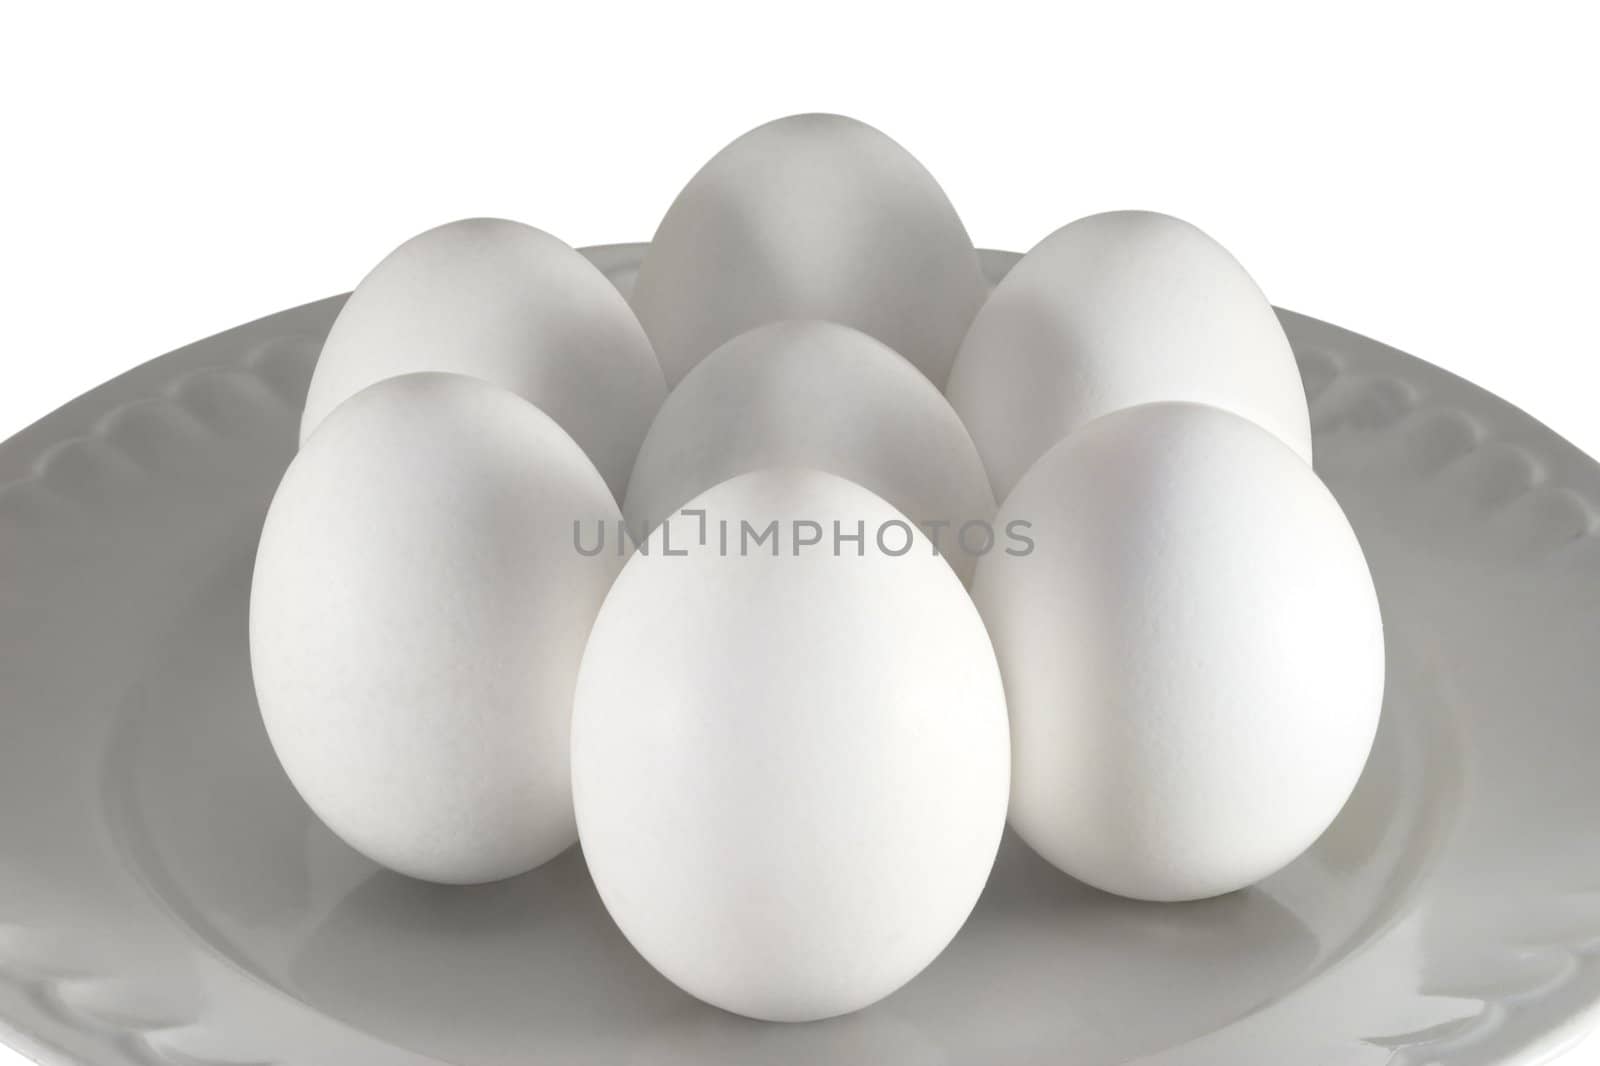 White chicken eggs in a plate on a white background